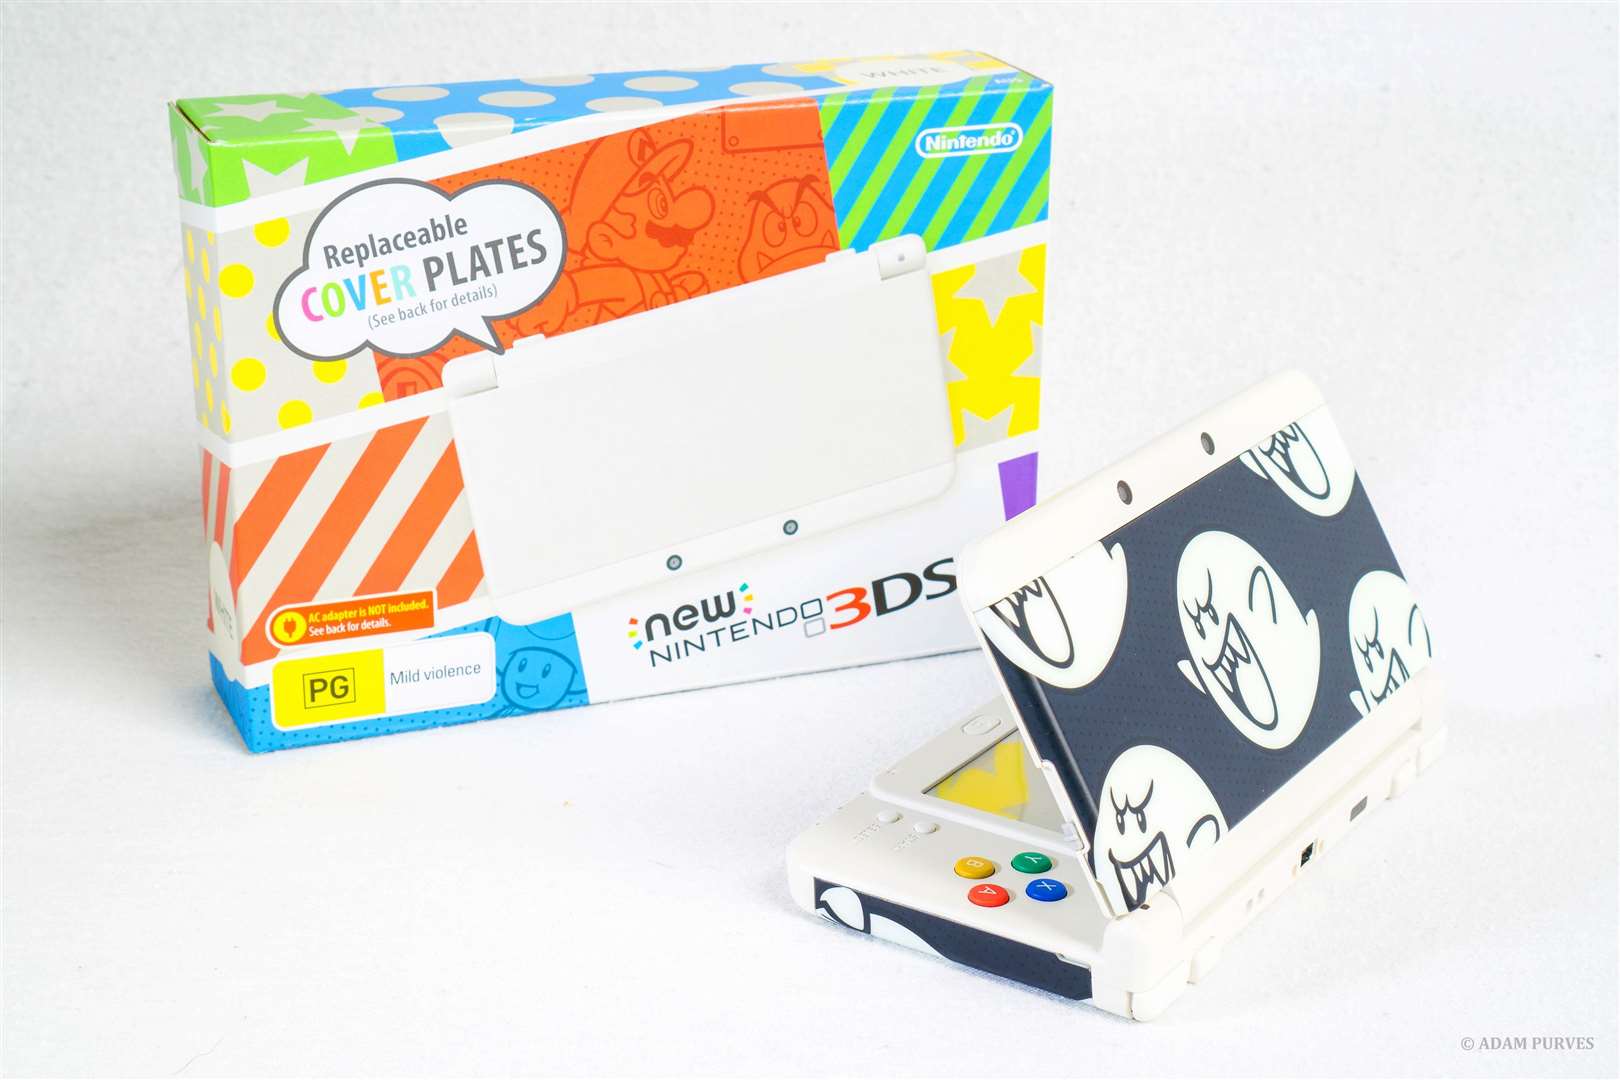 The Nintendo 3DS was sought after in 2011.